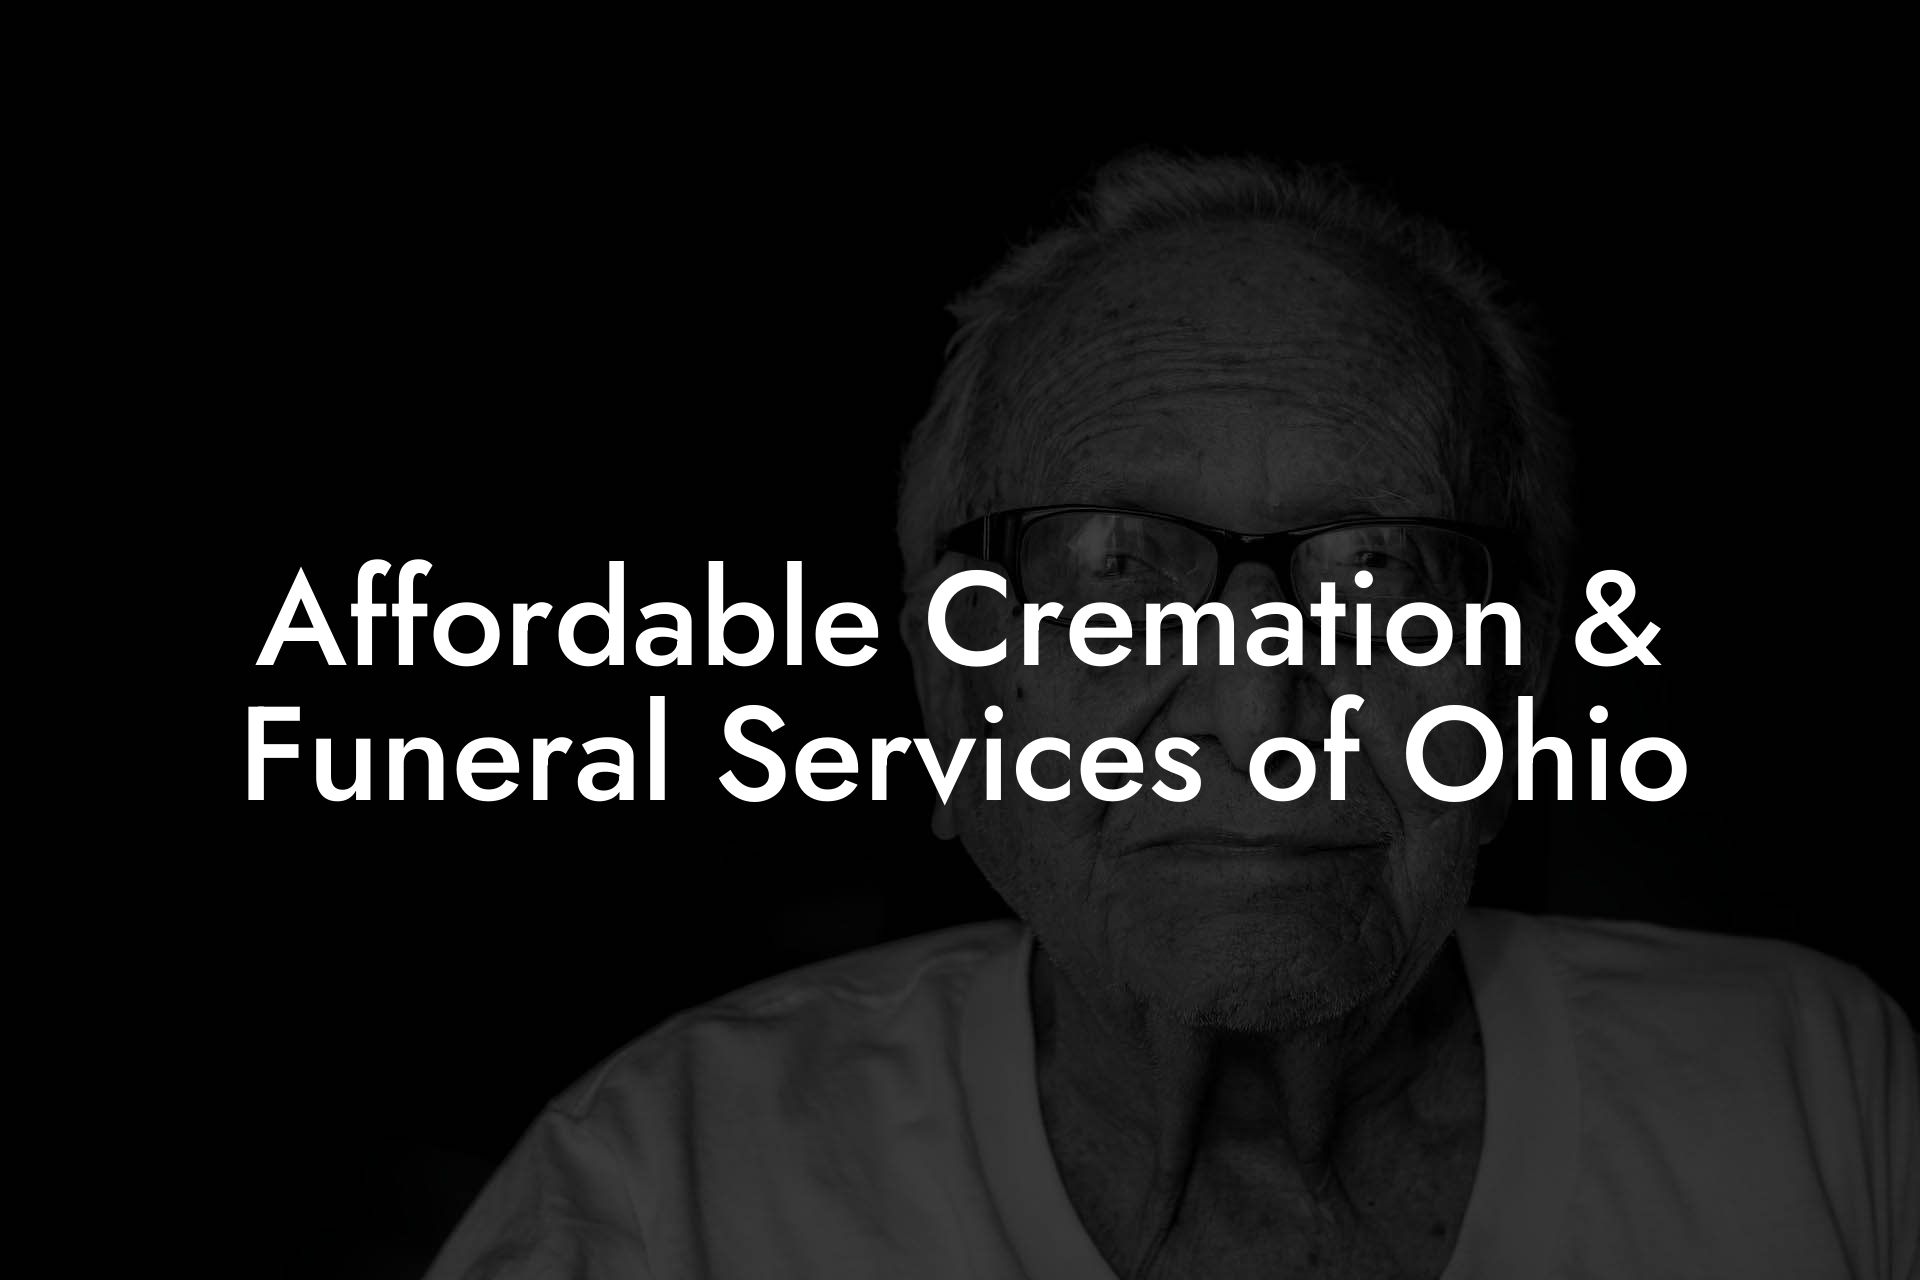 Affordable Cremation & Funeral Services of Ohio